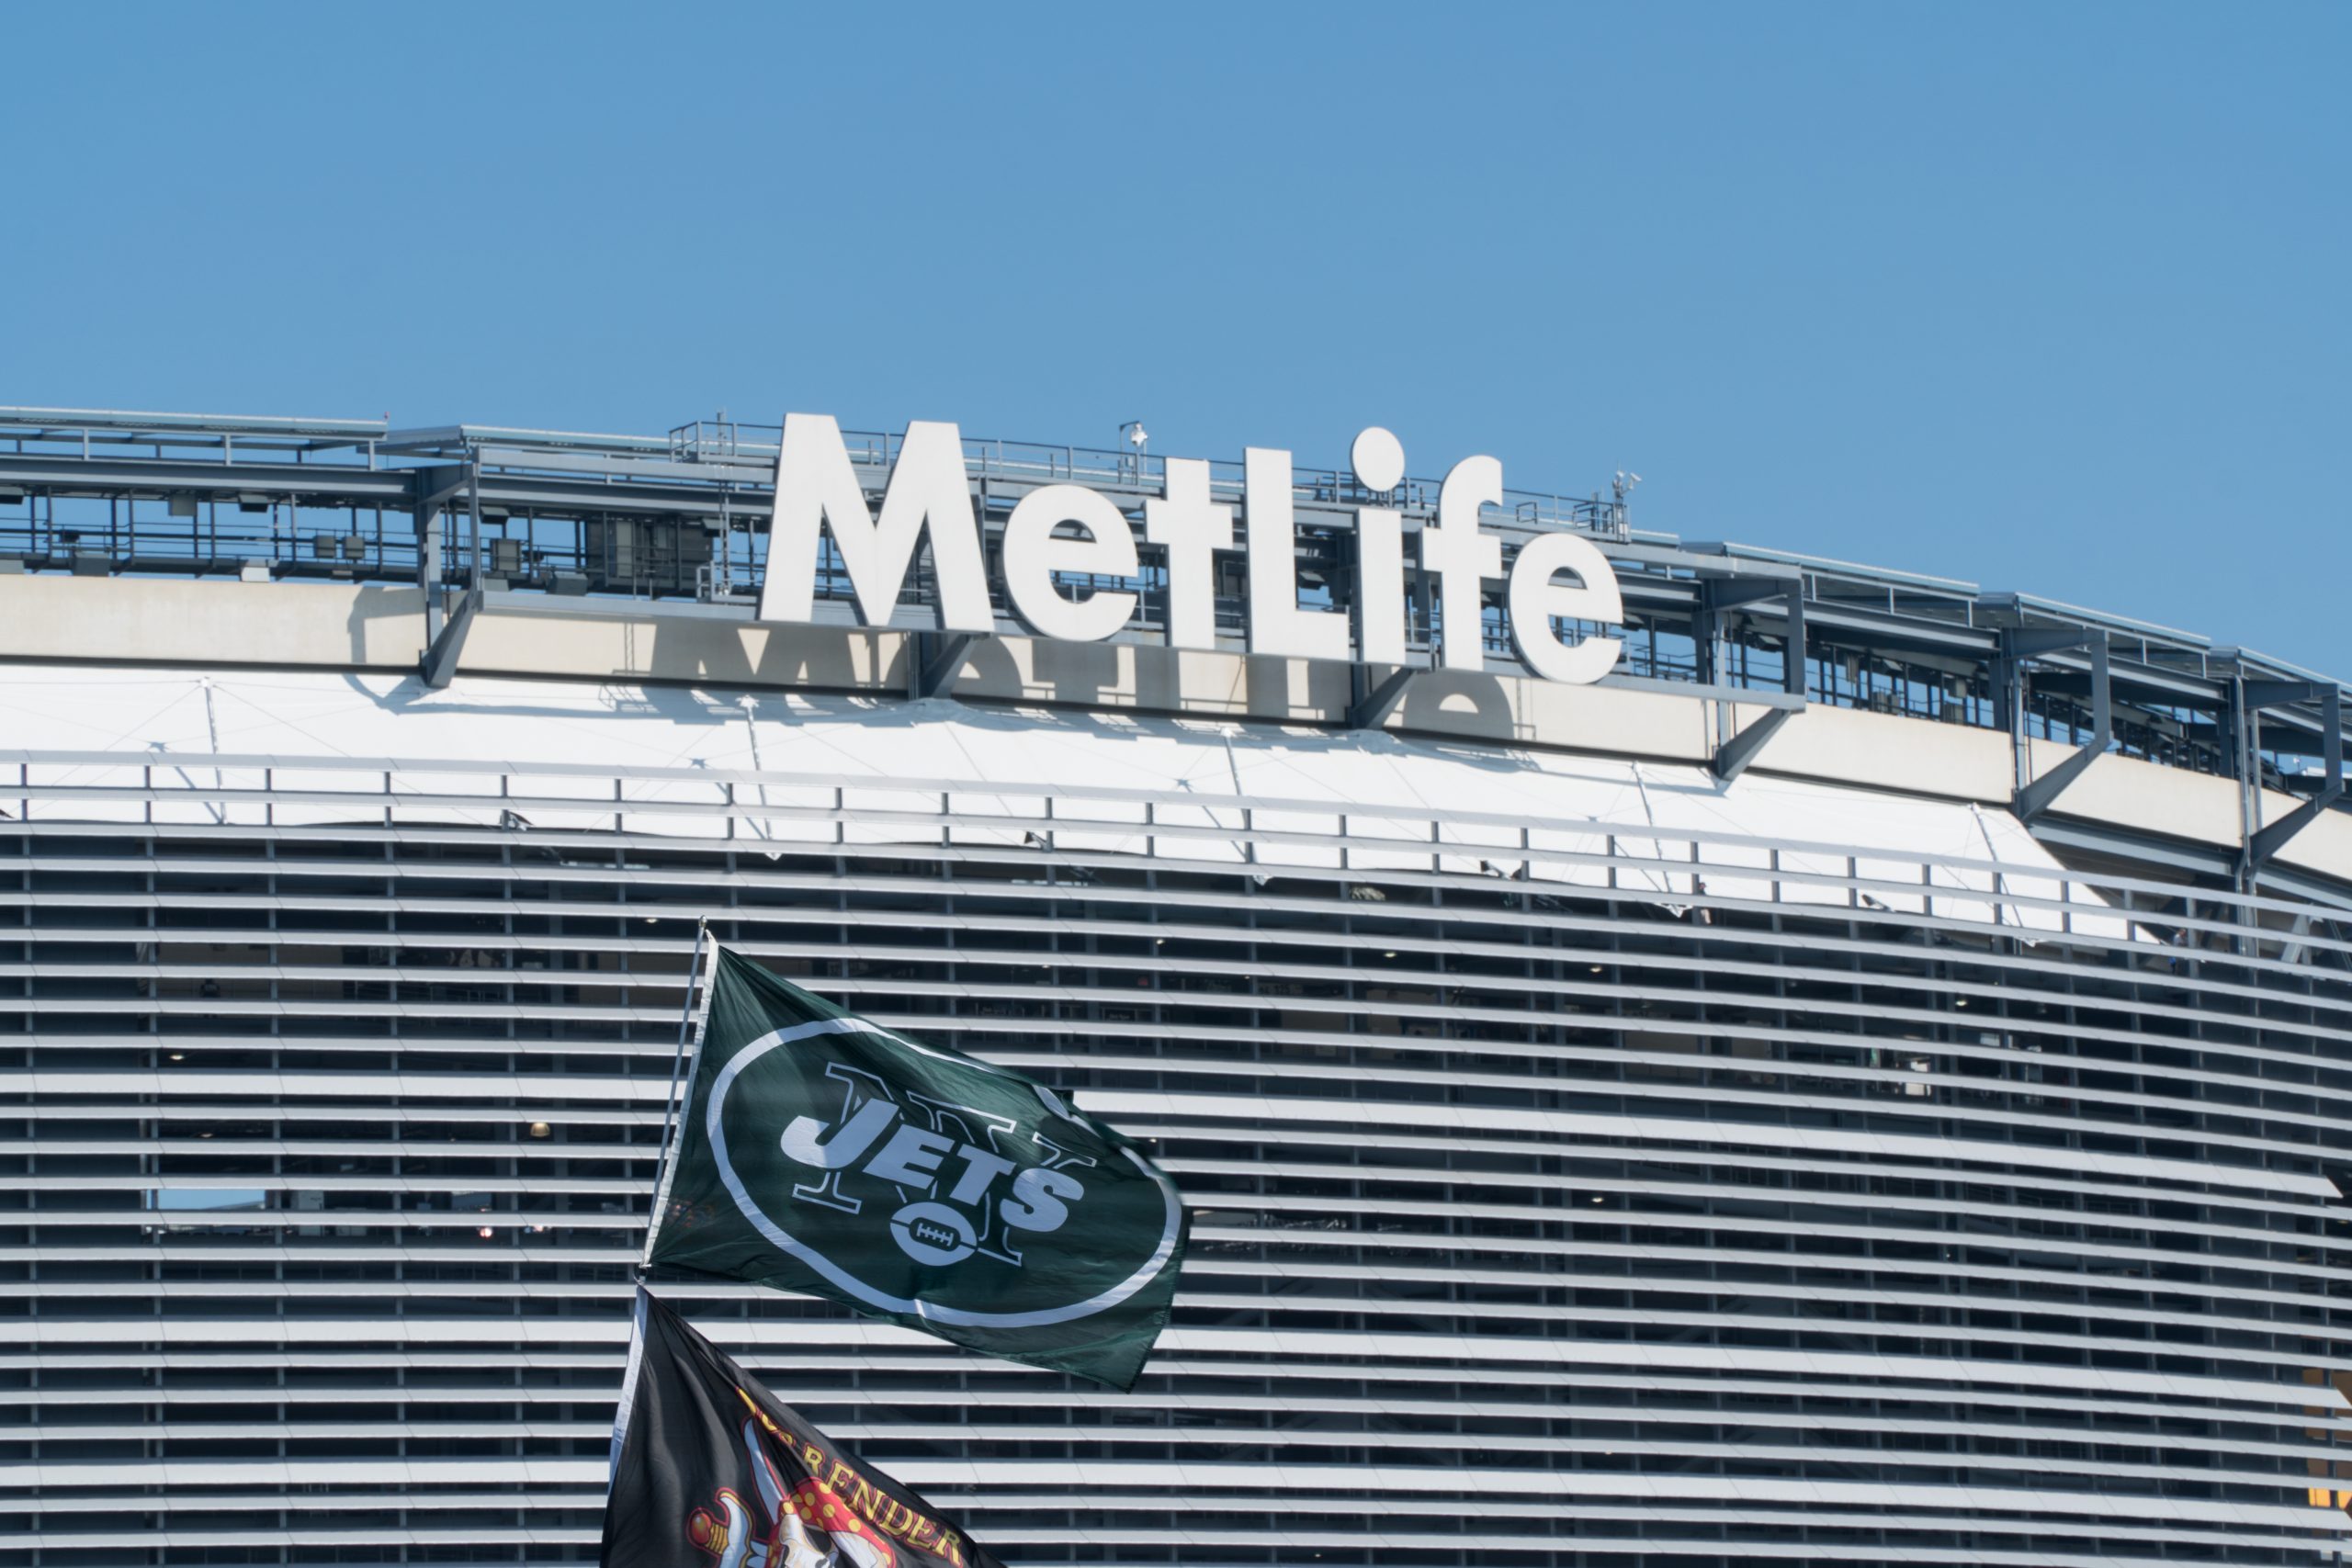 East Rutherford, New Jersey - Circa 2017: New York Jets football team flag waves in wind during parking lot tailgate outside Metlife Stadium before season game